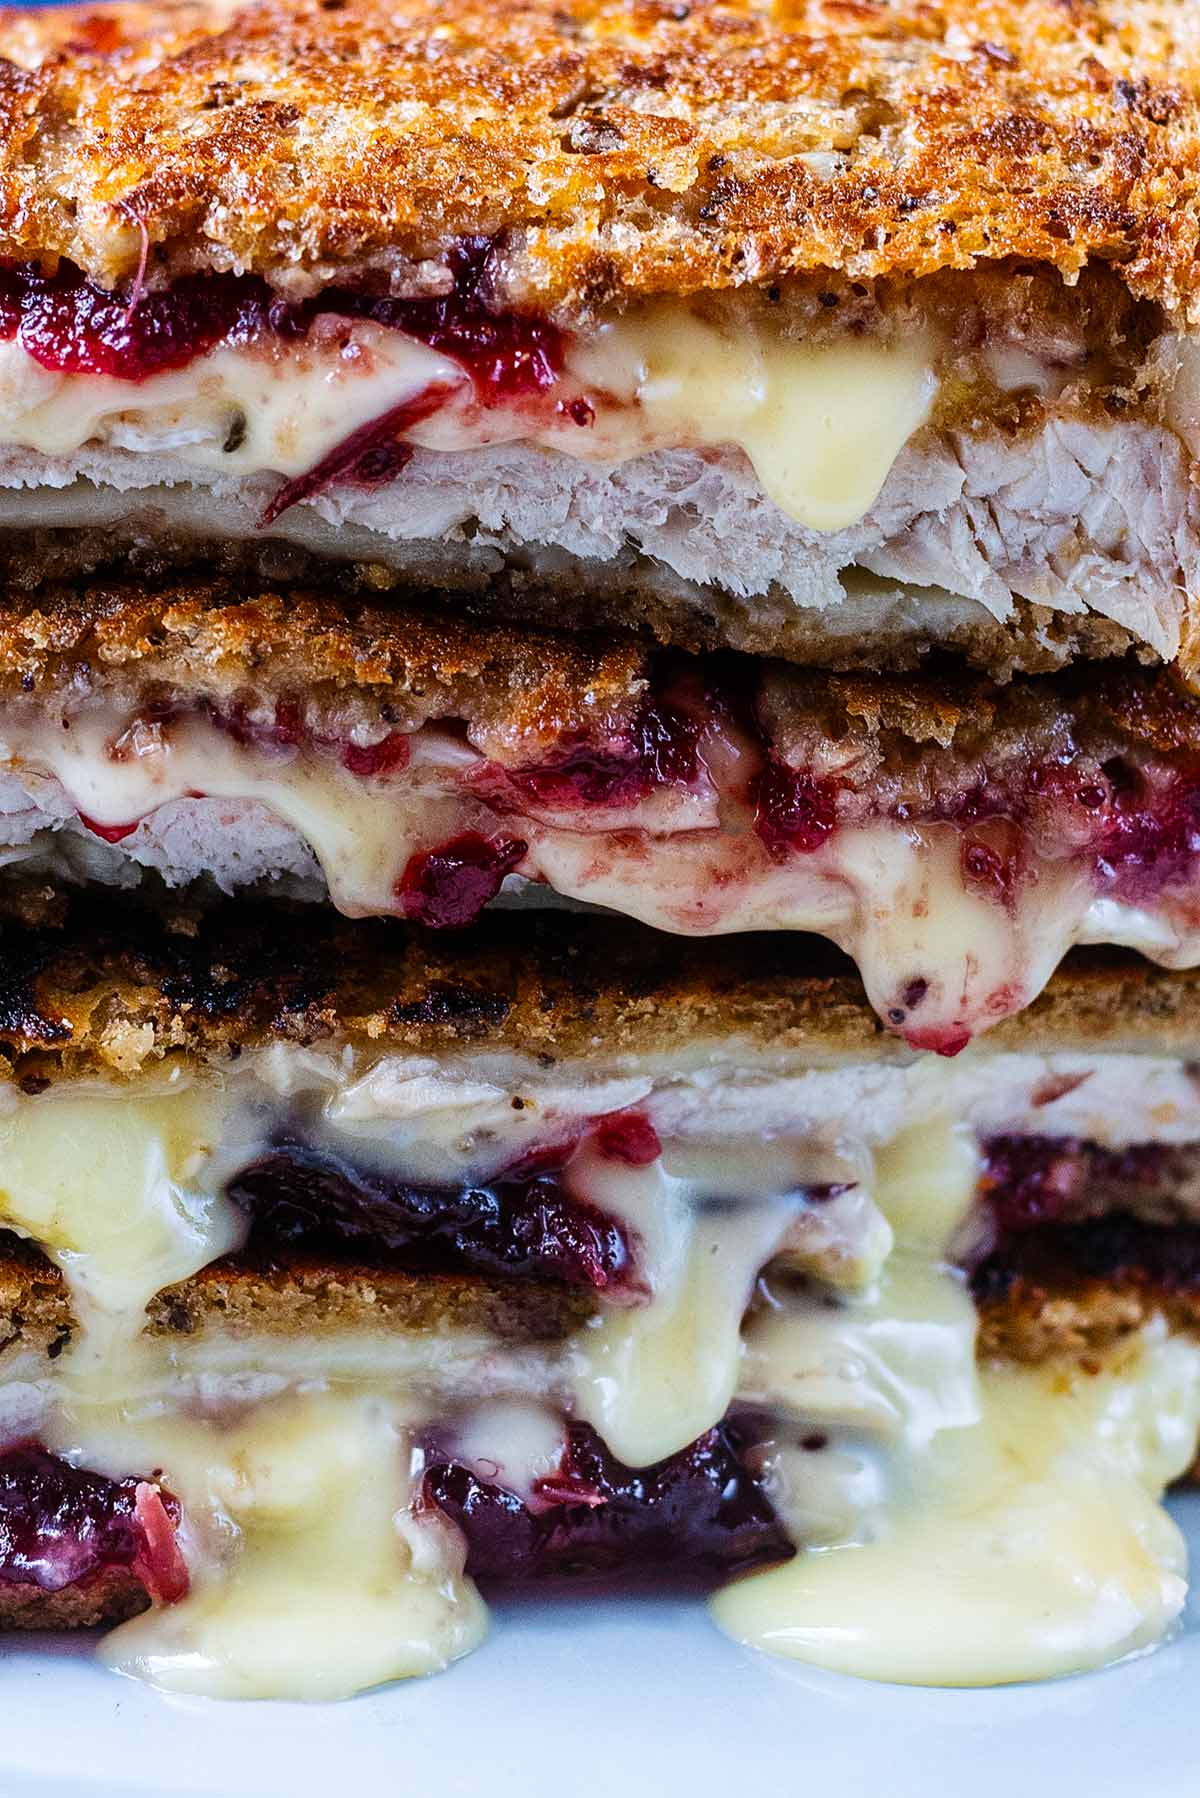 Melted cheese and cranberry sauce oozing out of a toasted sandwich.